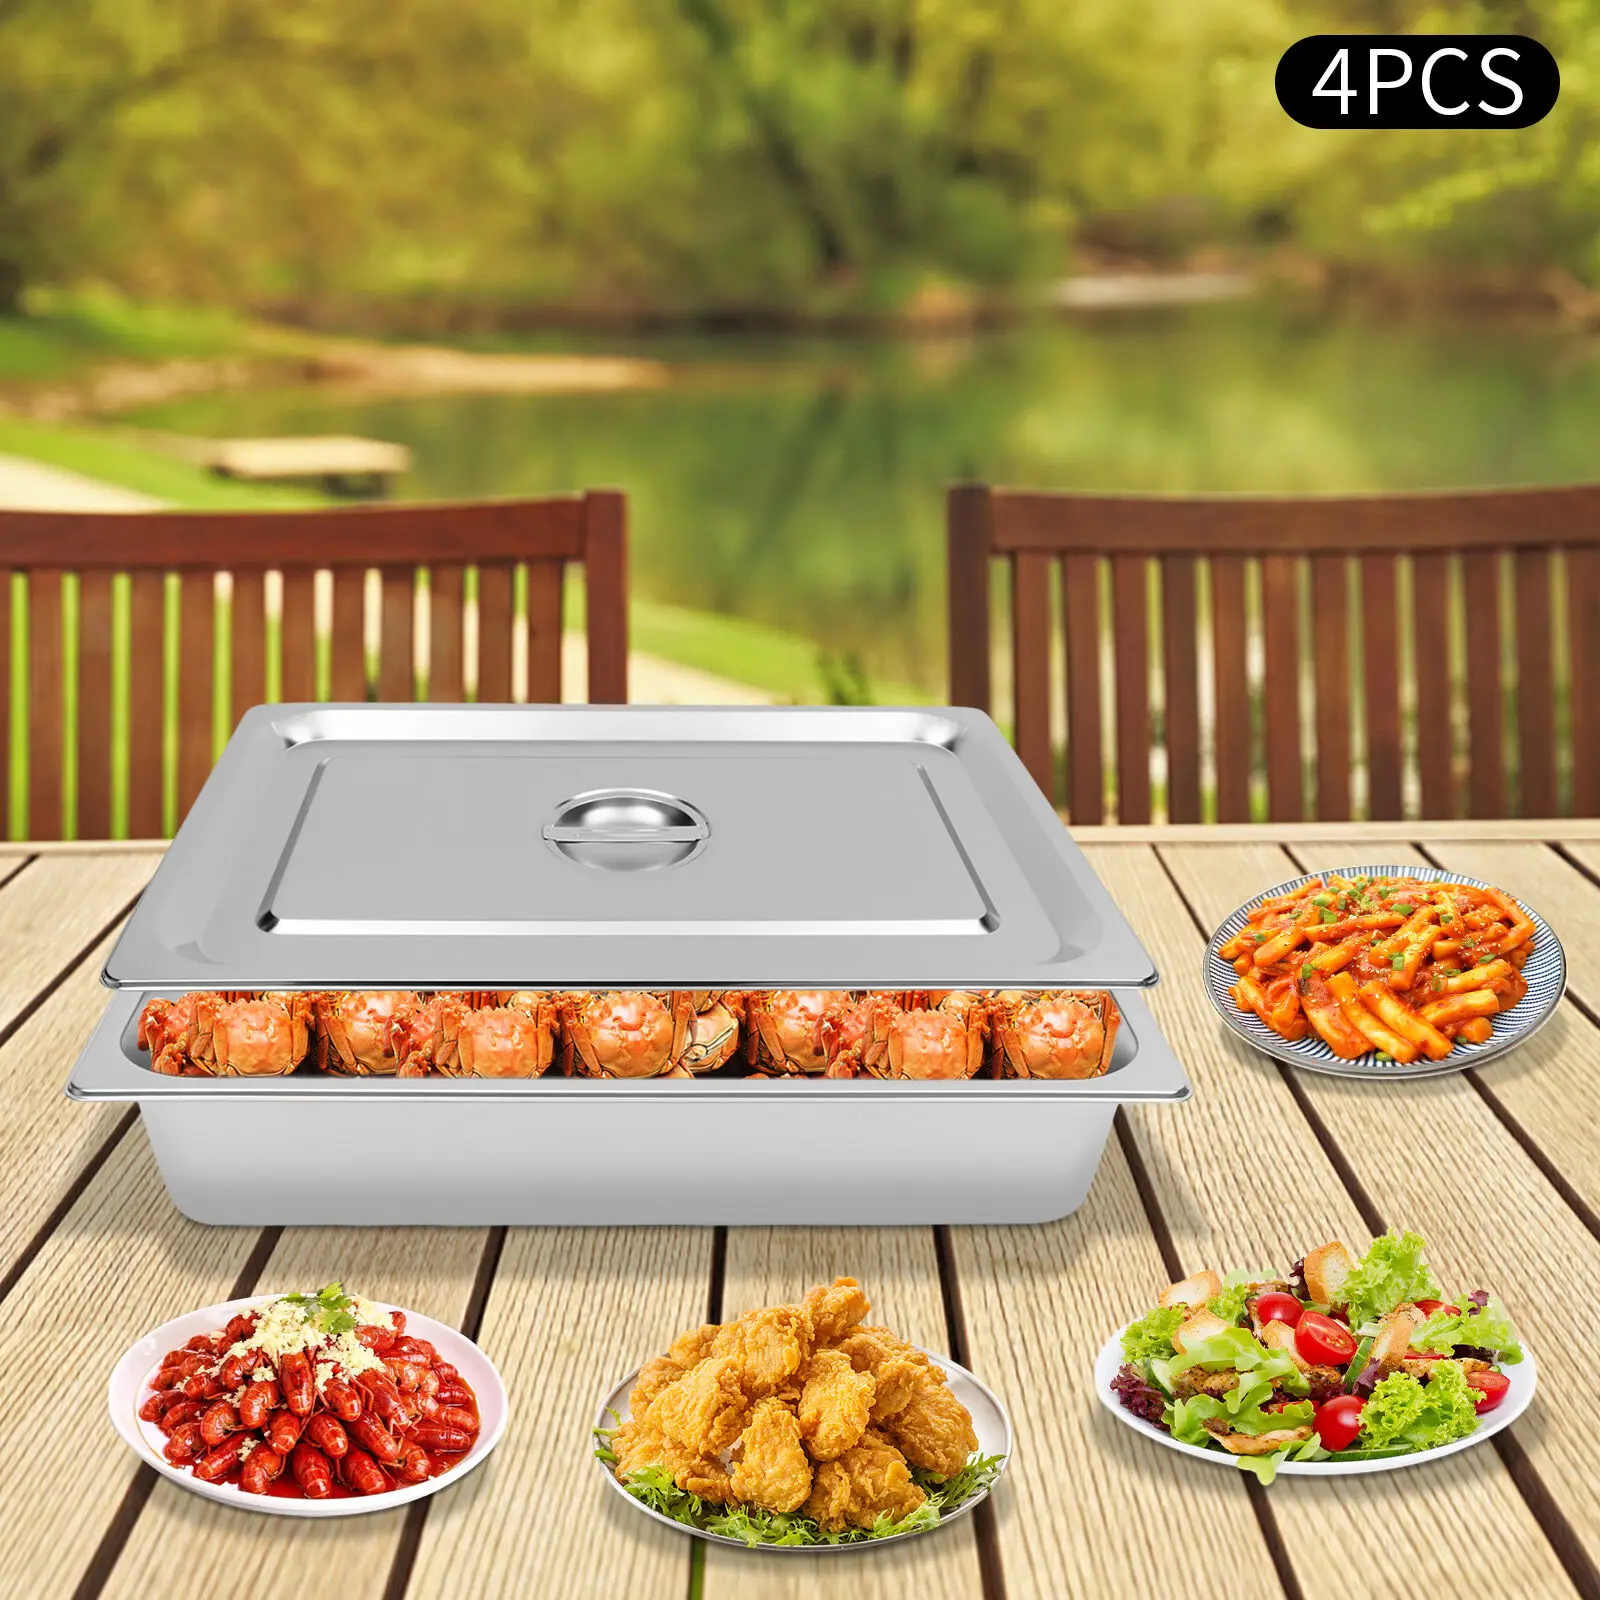 

4Pcs Buffet Chafing Dishes 4" Gastronorm Steam Table Pans Tray Stainless Steel Food Container For Party BBQ Baking